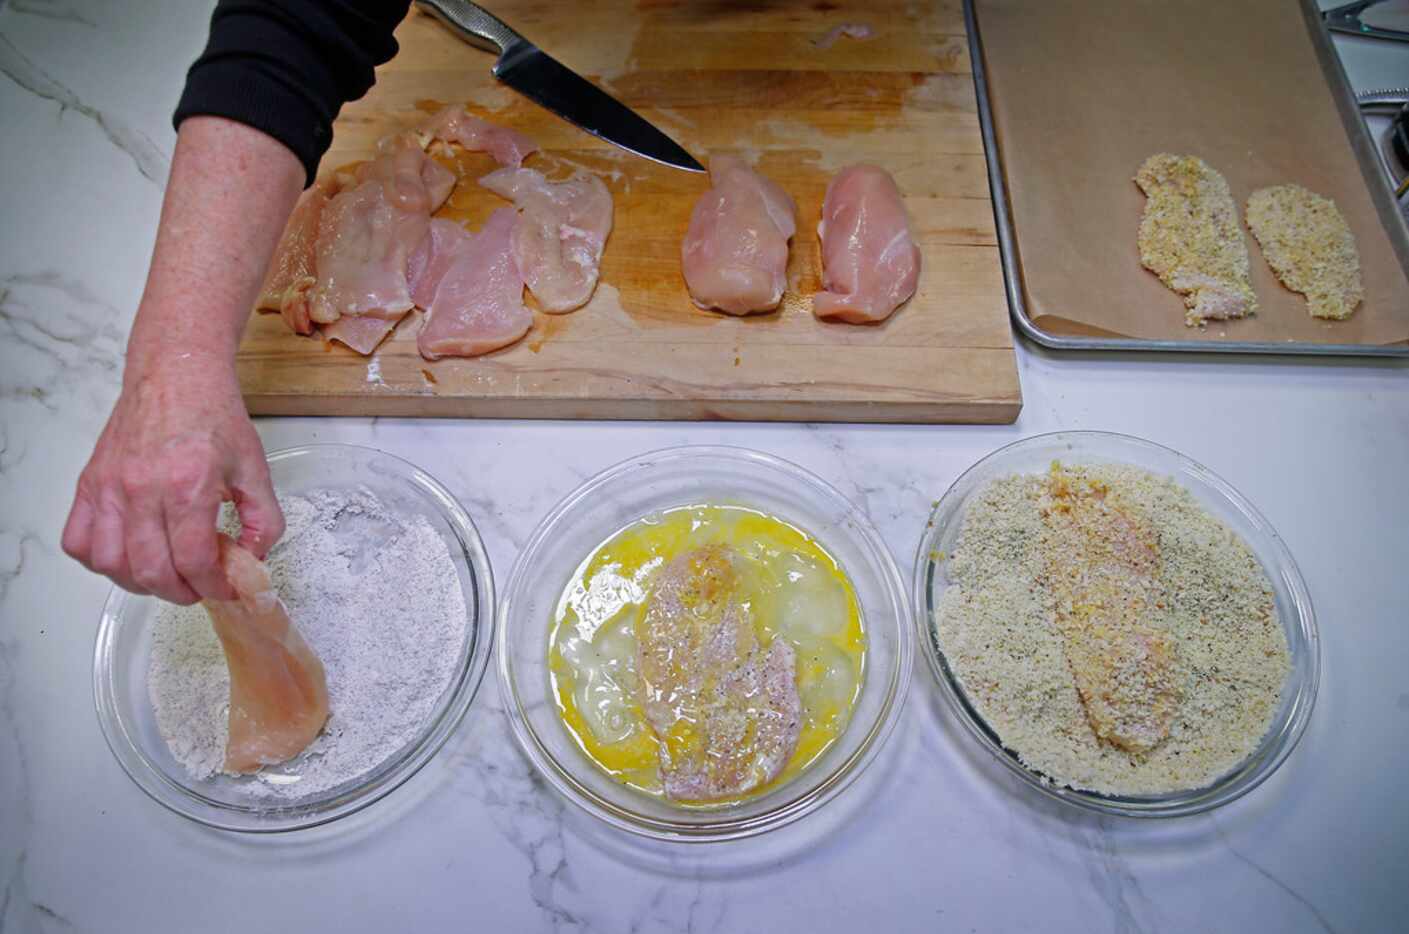 Place flour, egg and panko bread crumbs separately in three shallow dishes. Using the 3-step...